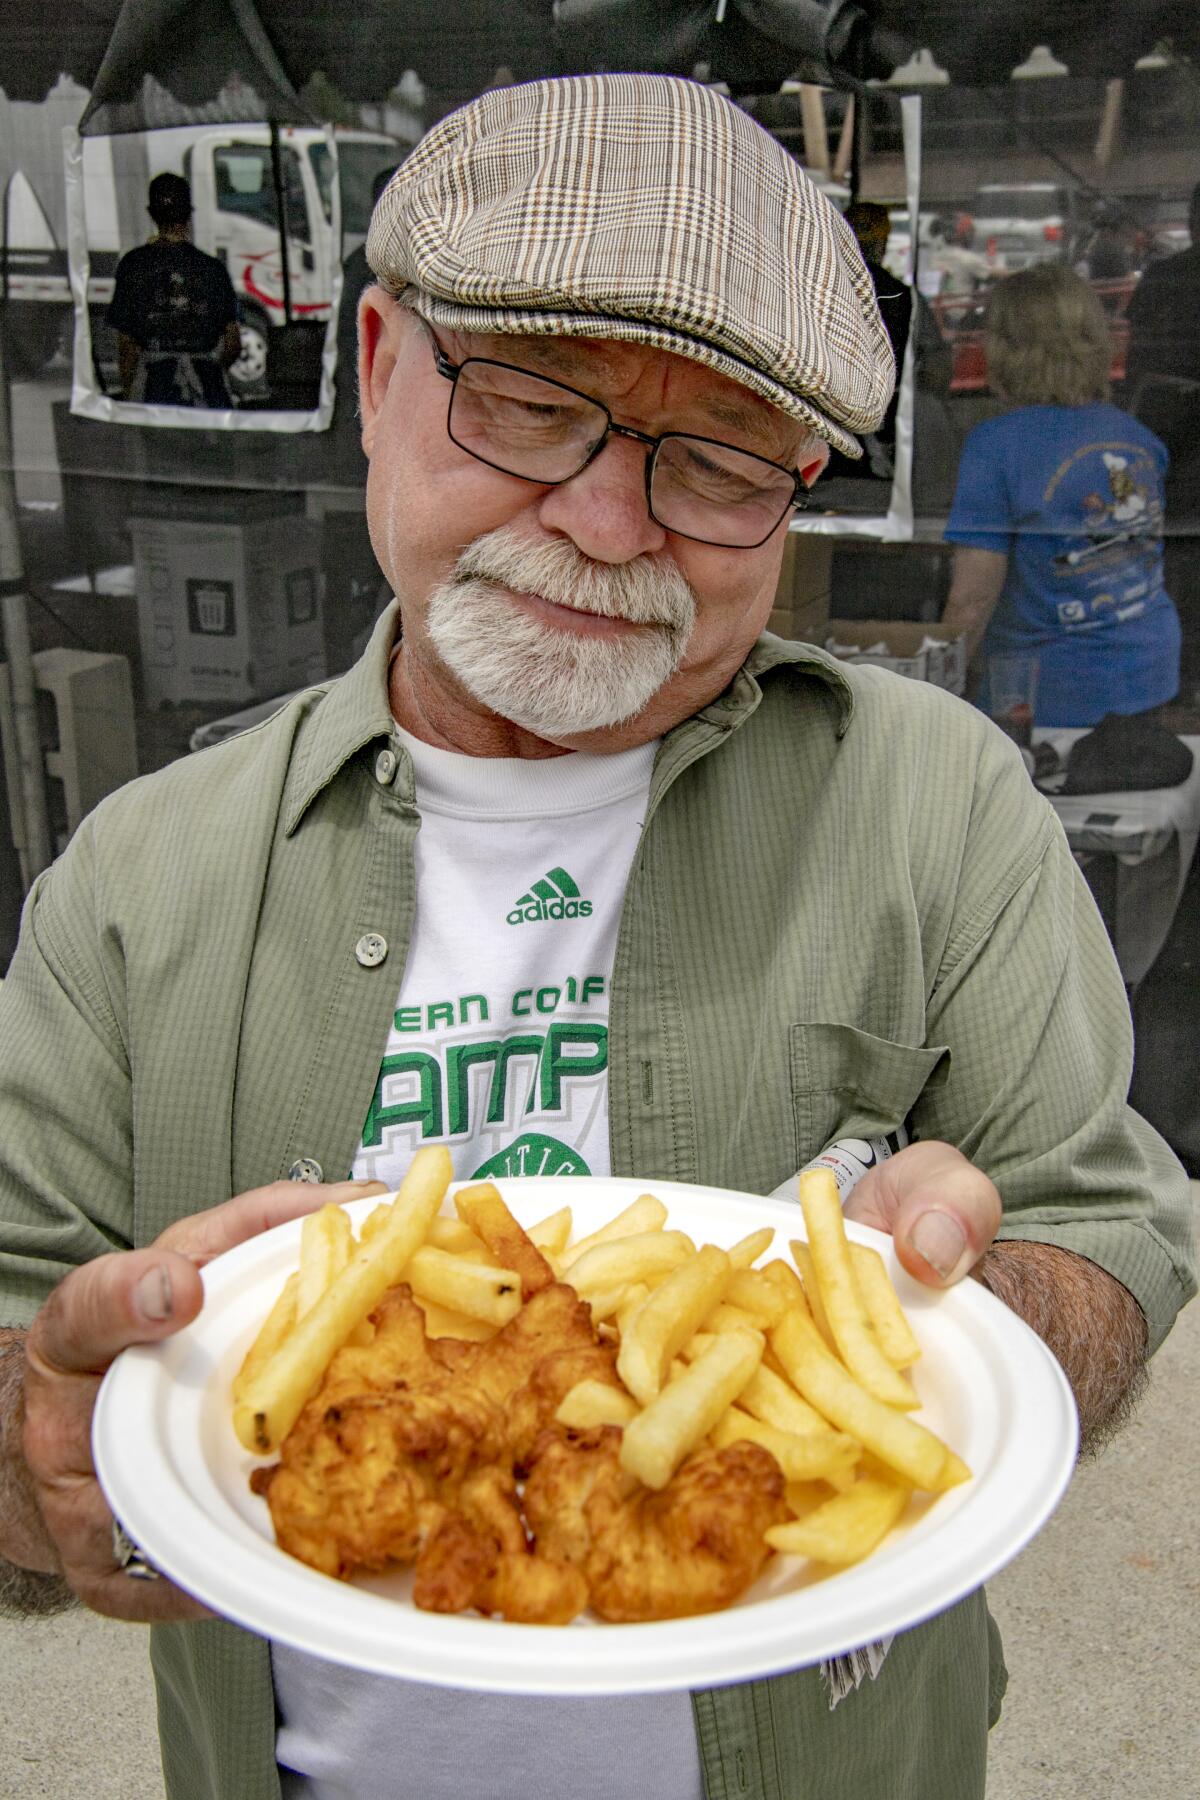 Fish was flying in Costa Mesa, as 75th Lions Club's Fish Fry returned